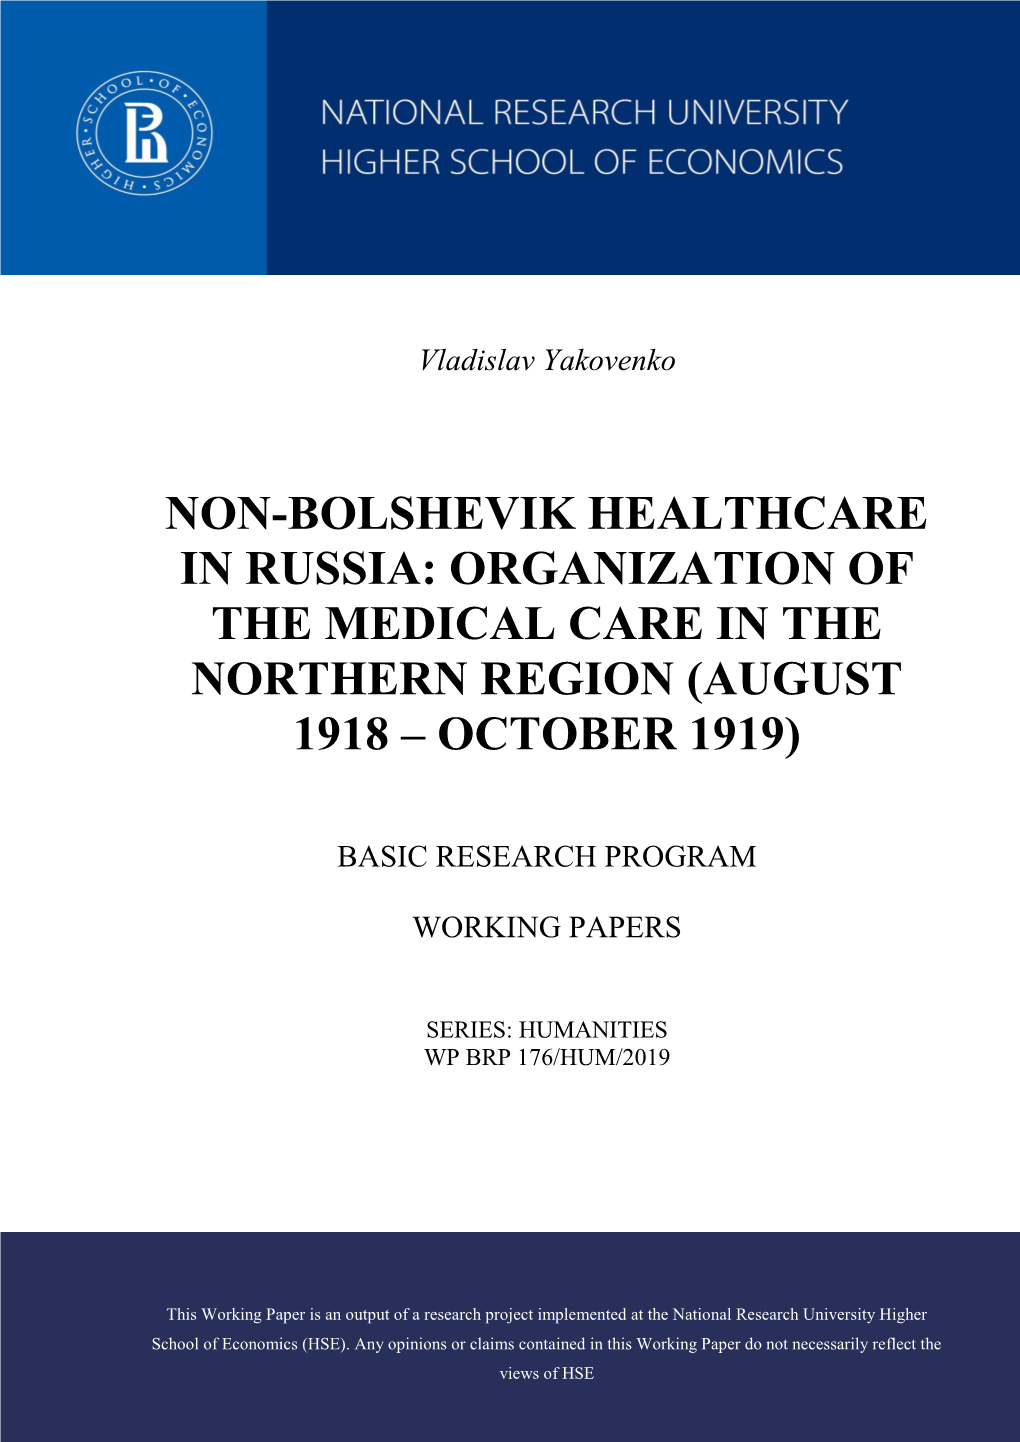 Non-Bolshevik Healthcare in Russia: Organization of the Medical Care in the Northern Region (August 1918 – October 1919)